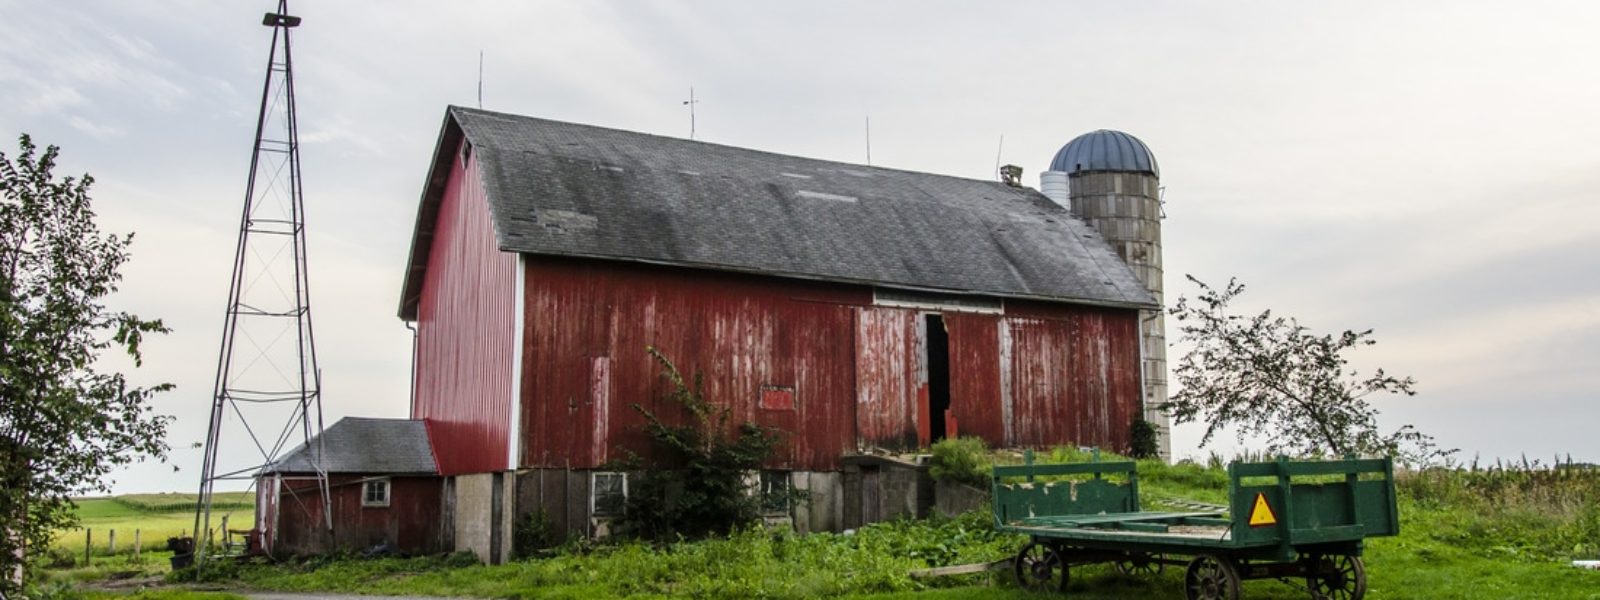 A red barn next to a green field with farming equipment